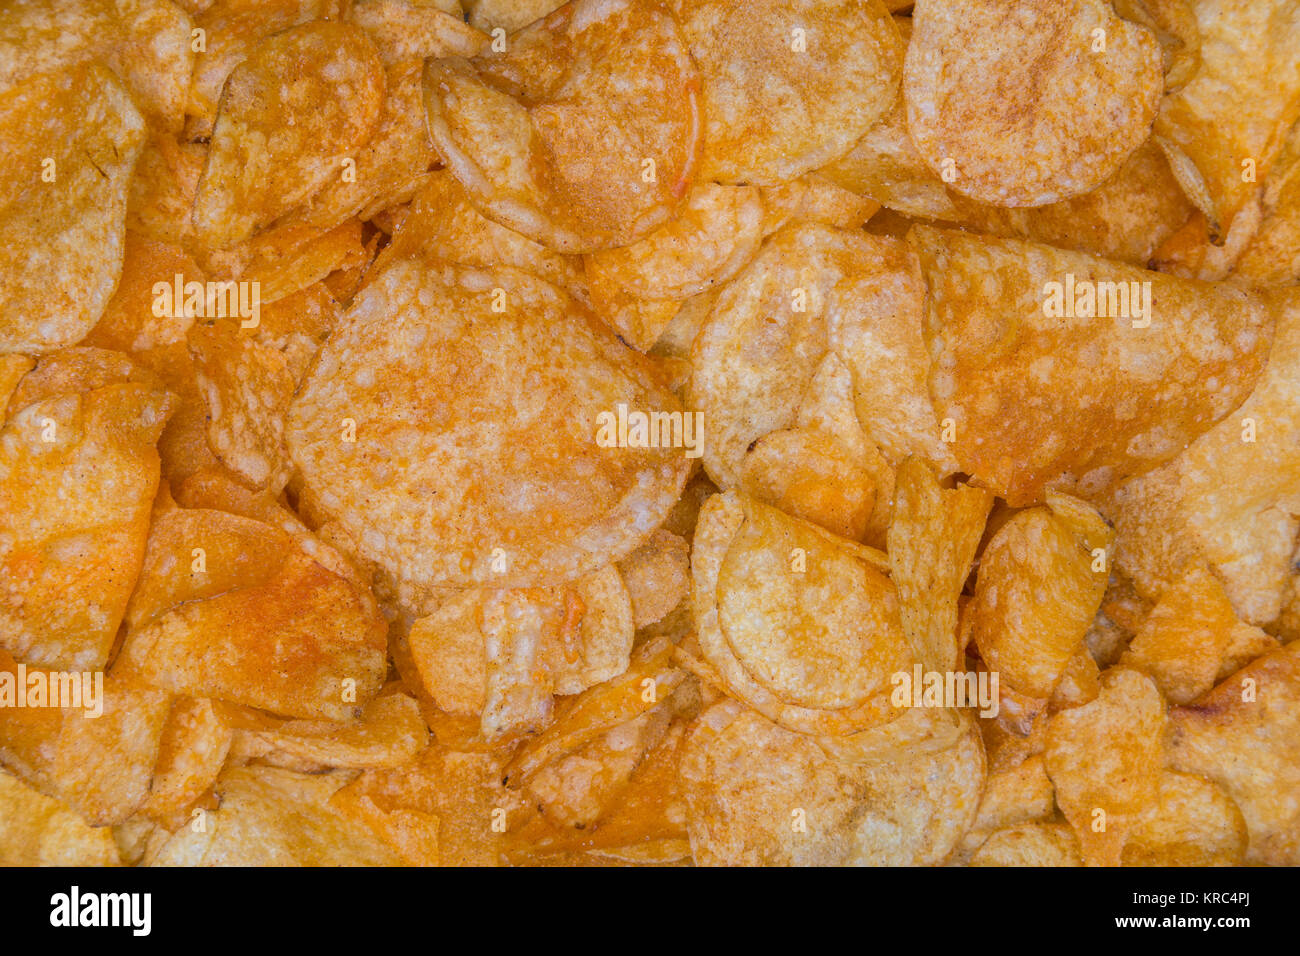 Many potato chips as a texture background. Stock Photo